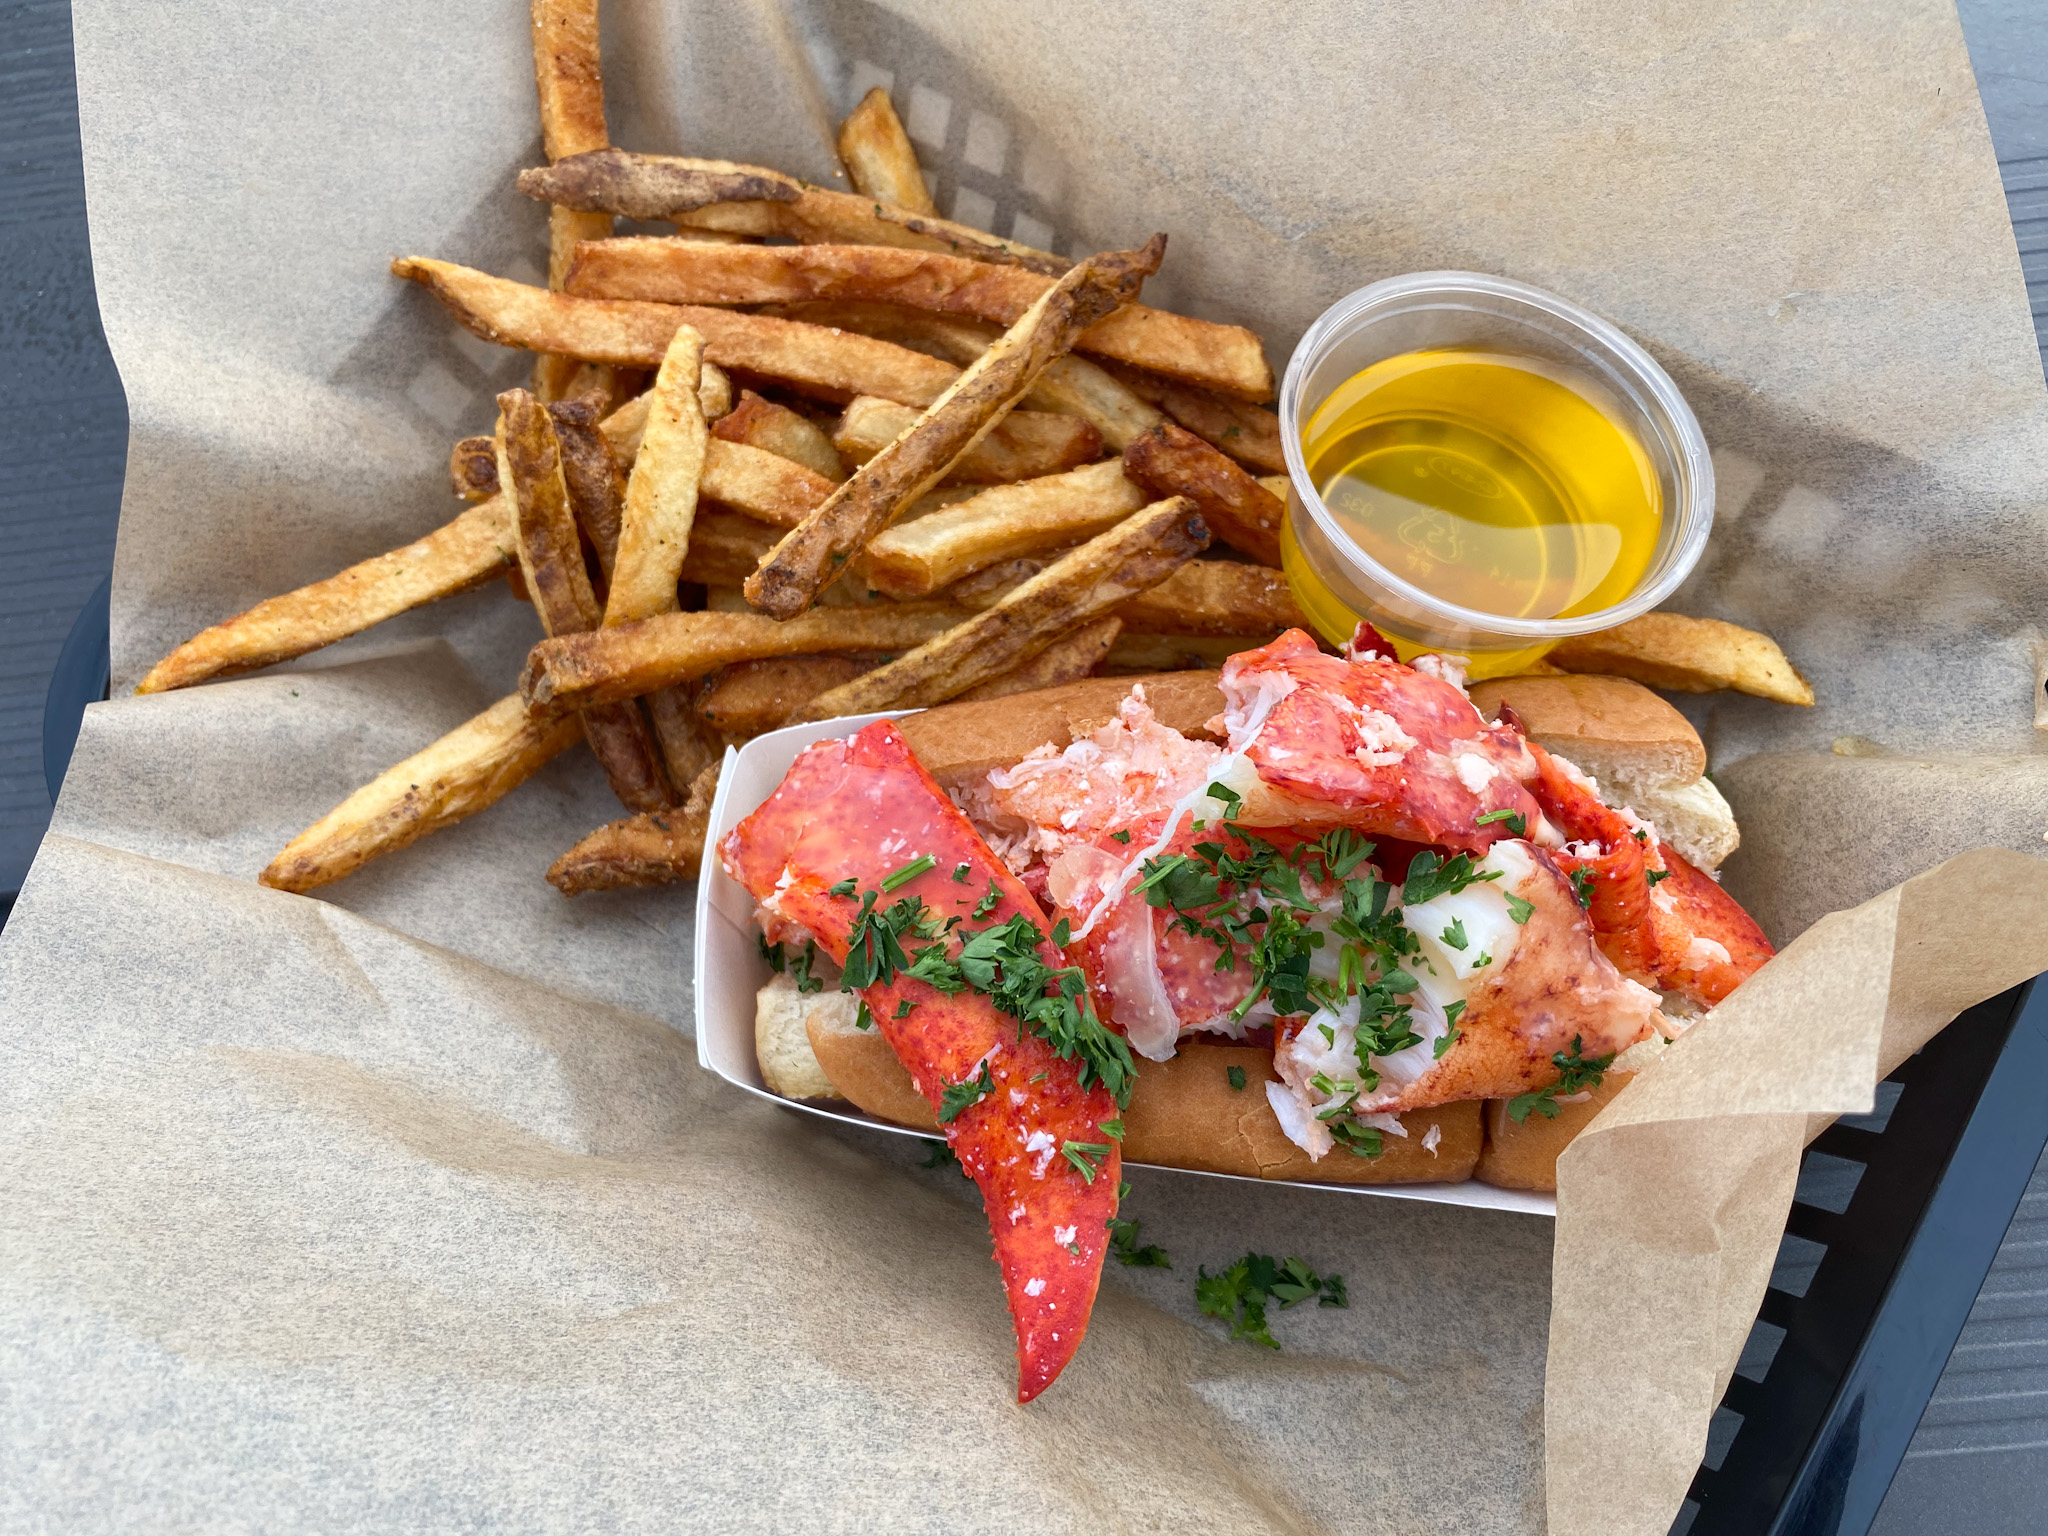 The incredible Lobster Roll and fries on the side